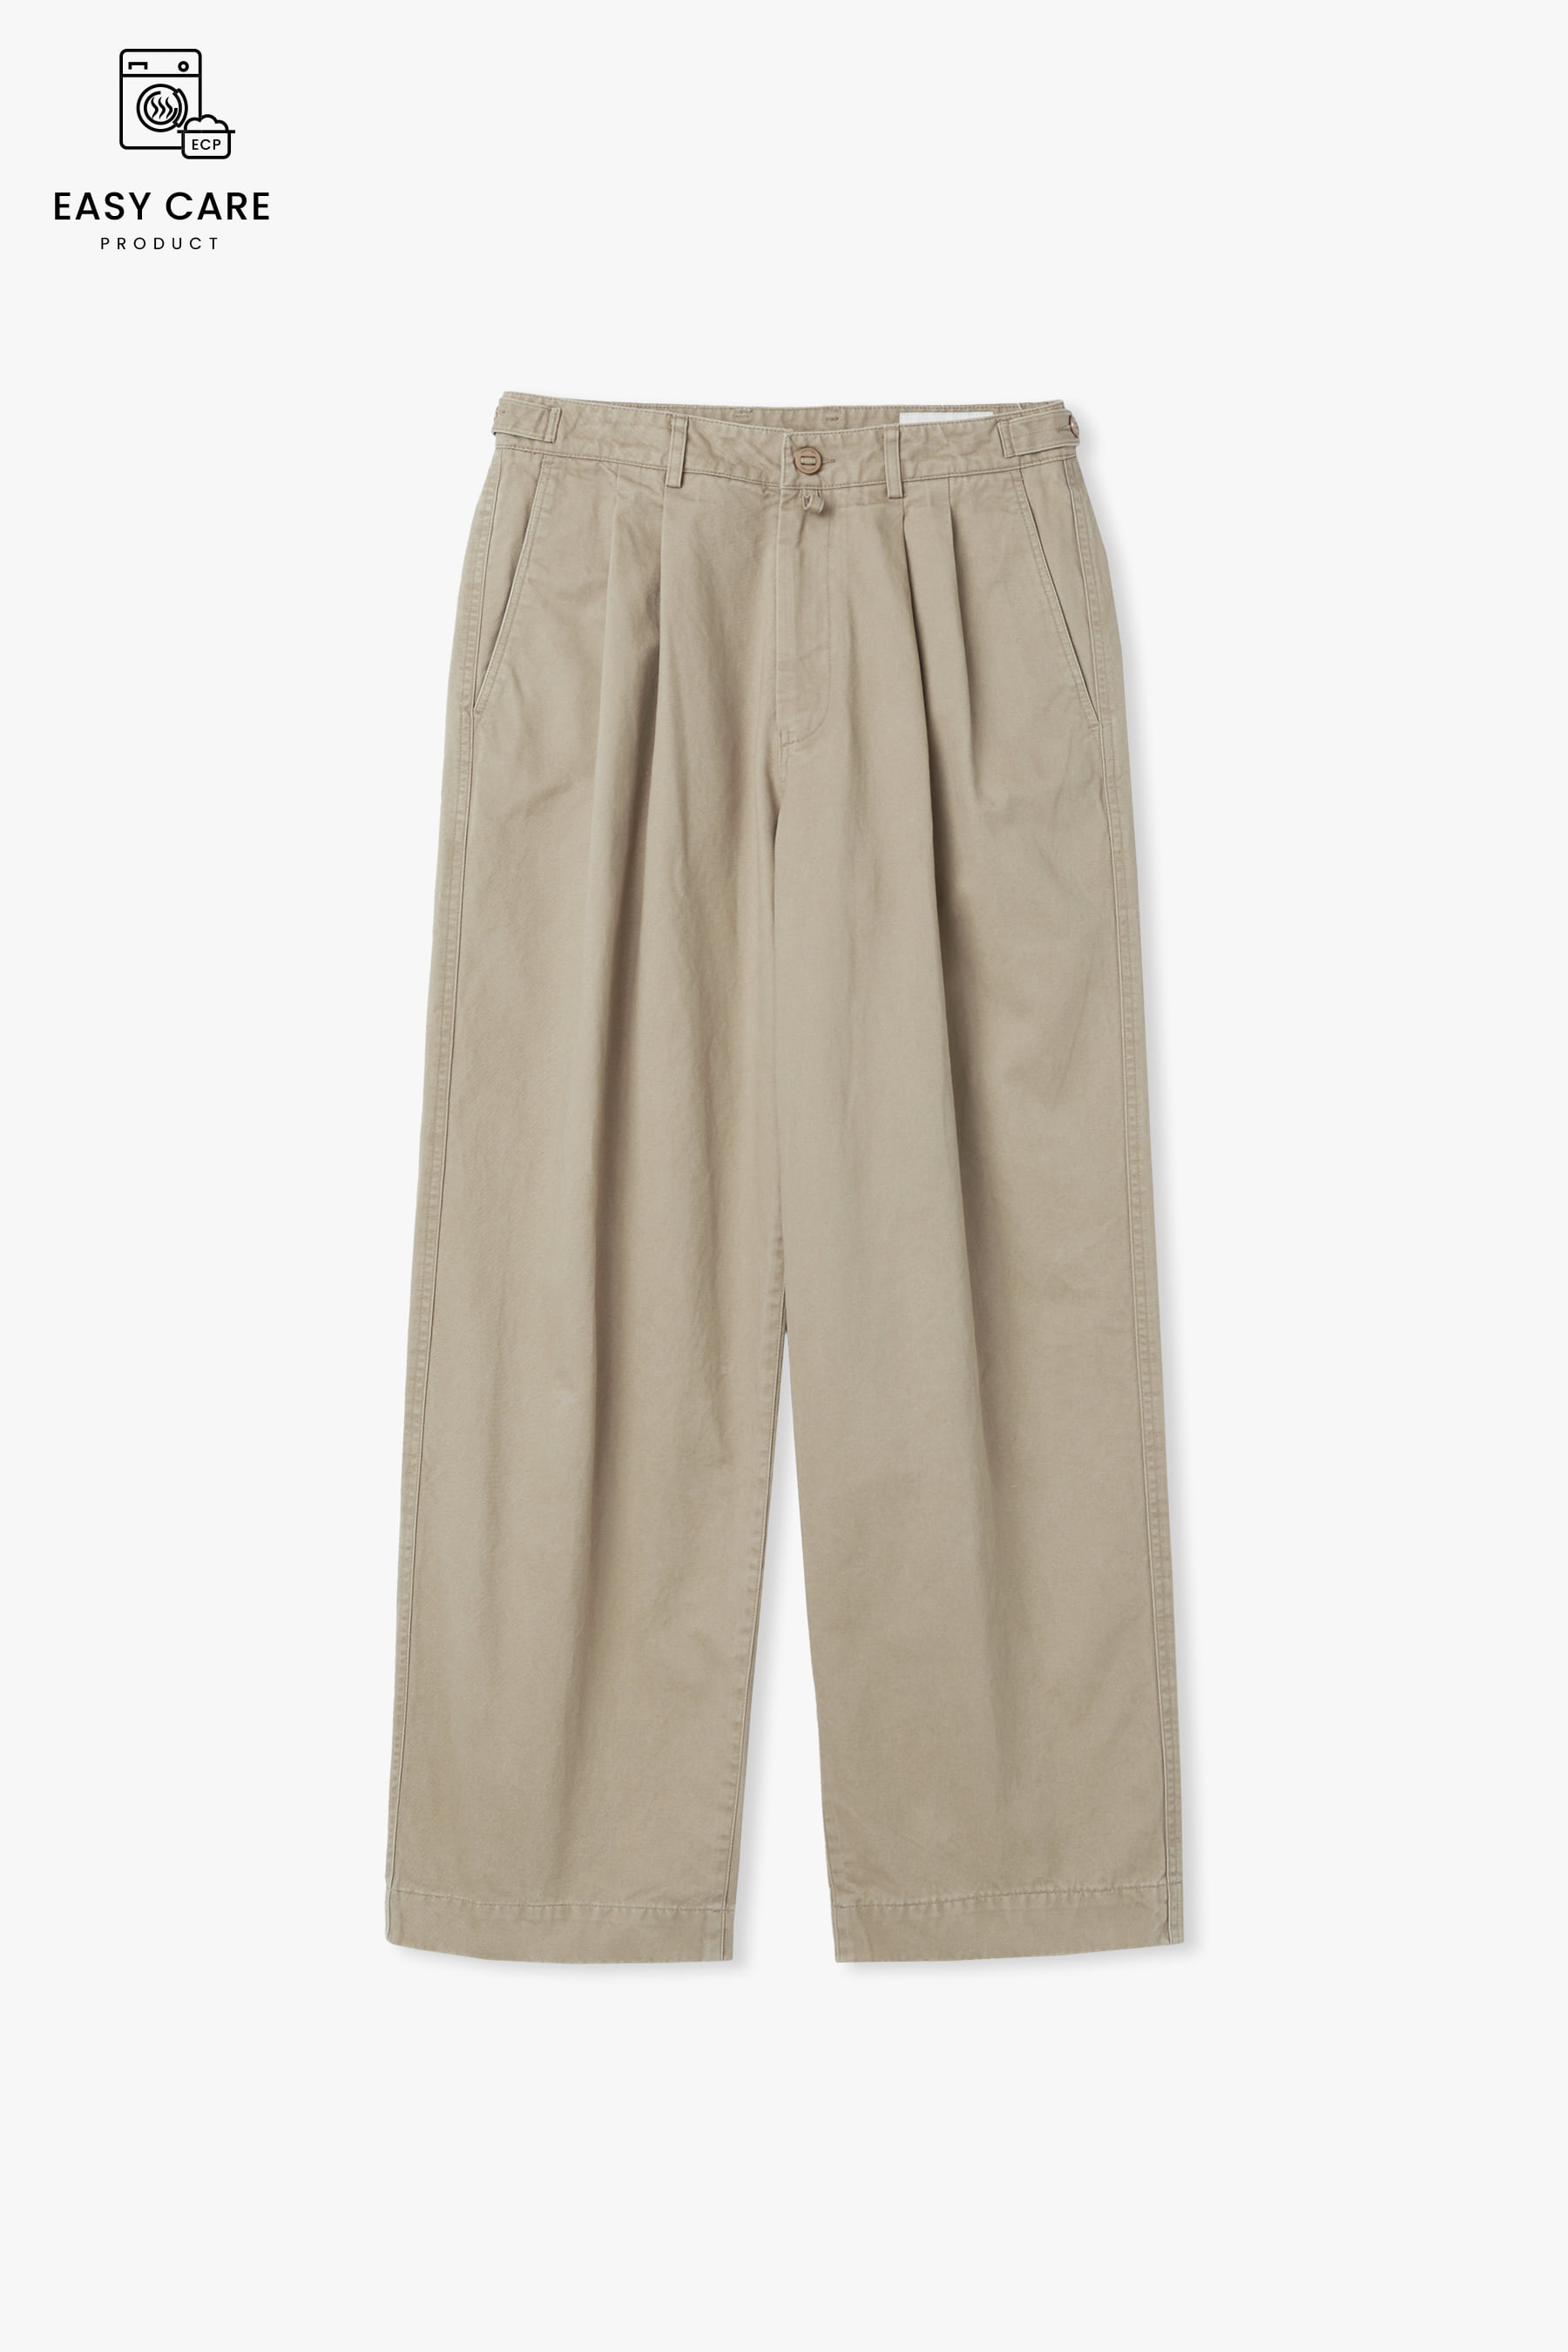 DUSTY BEIGE SOFT FLUFF COTTON YRS Y-550 WASHED WIDE CHINO PANTS (ECP GARMENT PROCESS)